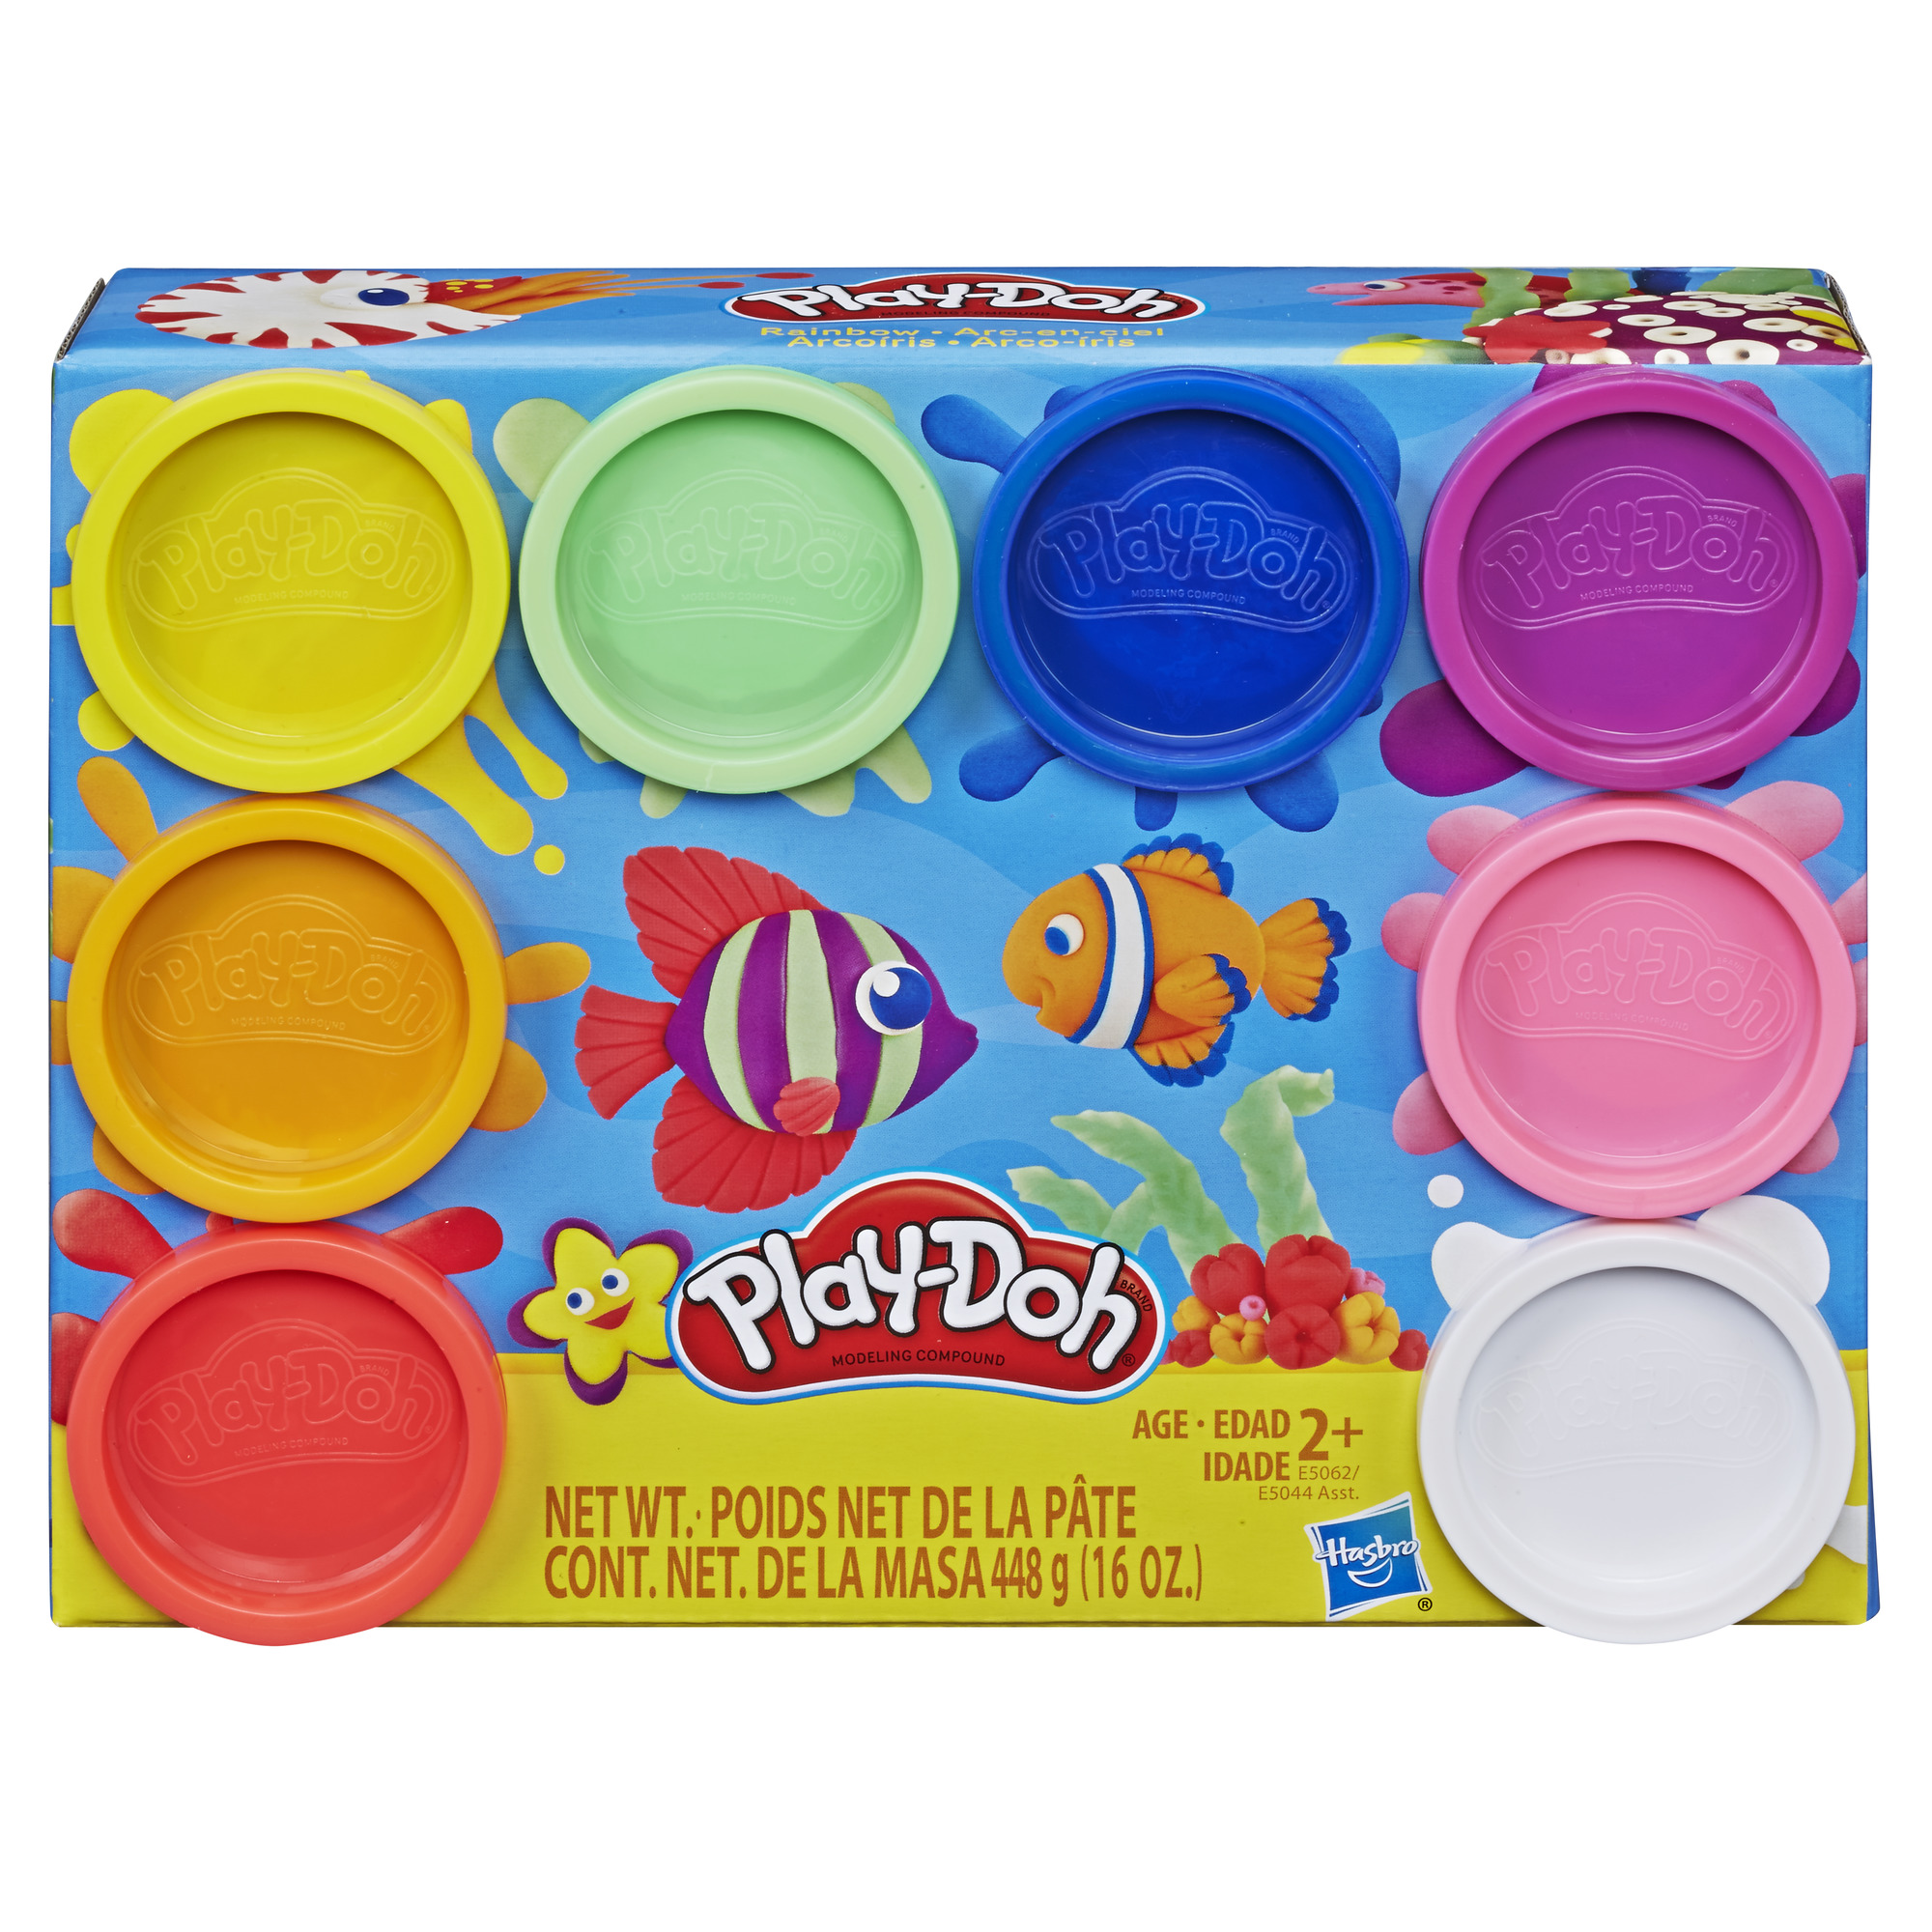 Play-Doh Rainbow Colors 8 Pack of 2-Ounce Cans, Back to School Supplies - image 1 of 7